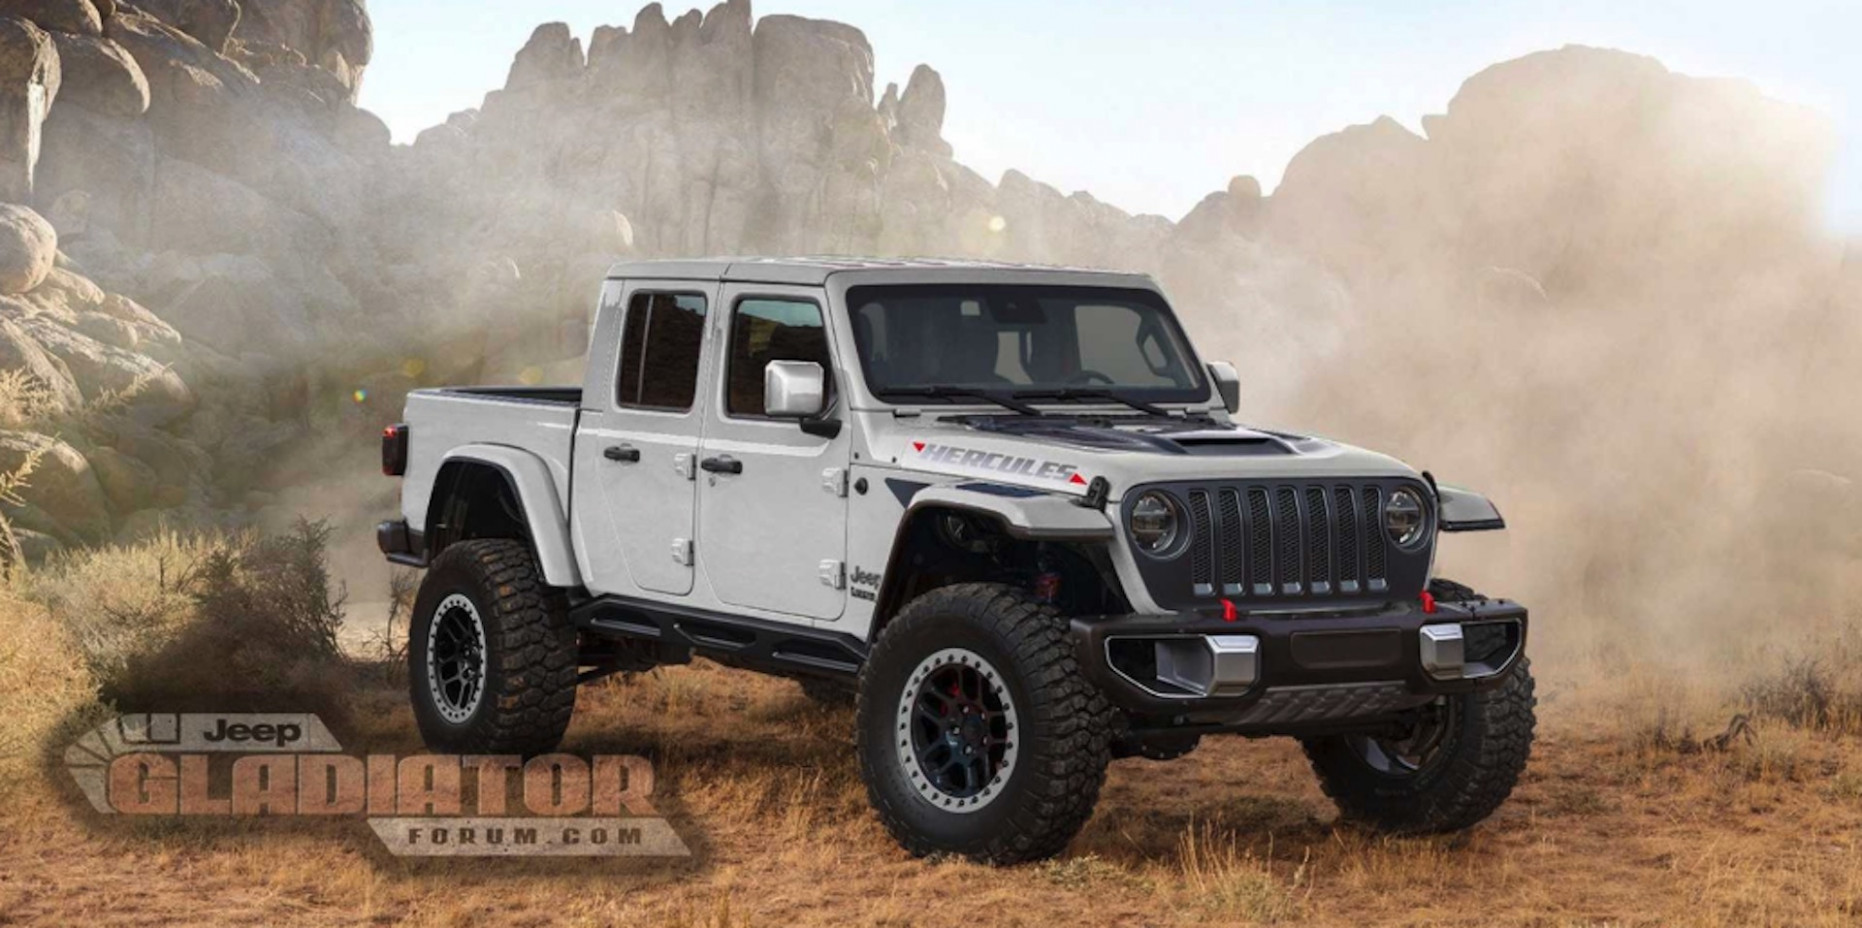 Concept When Does The 2022 Jeep Gladiator Come Out